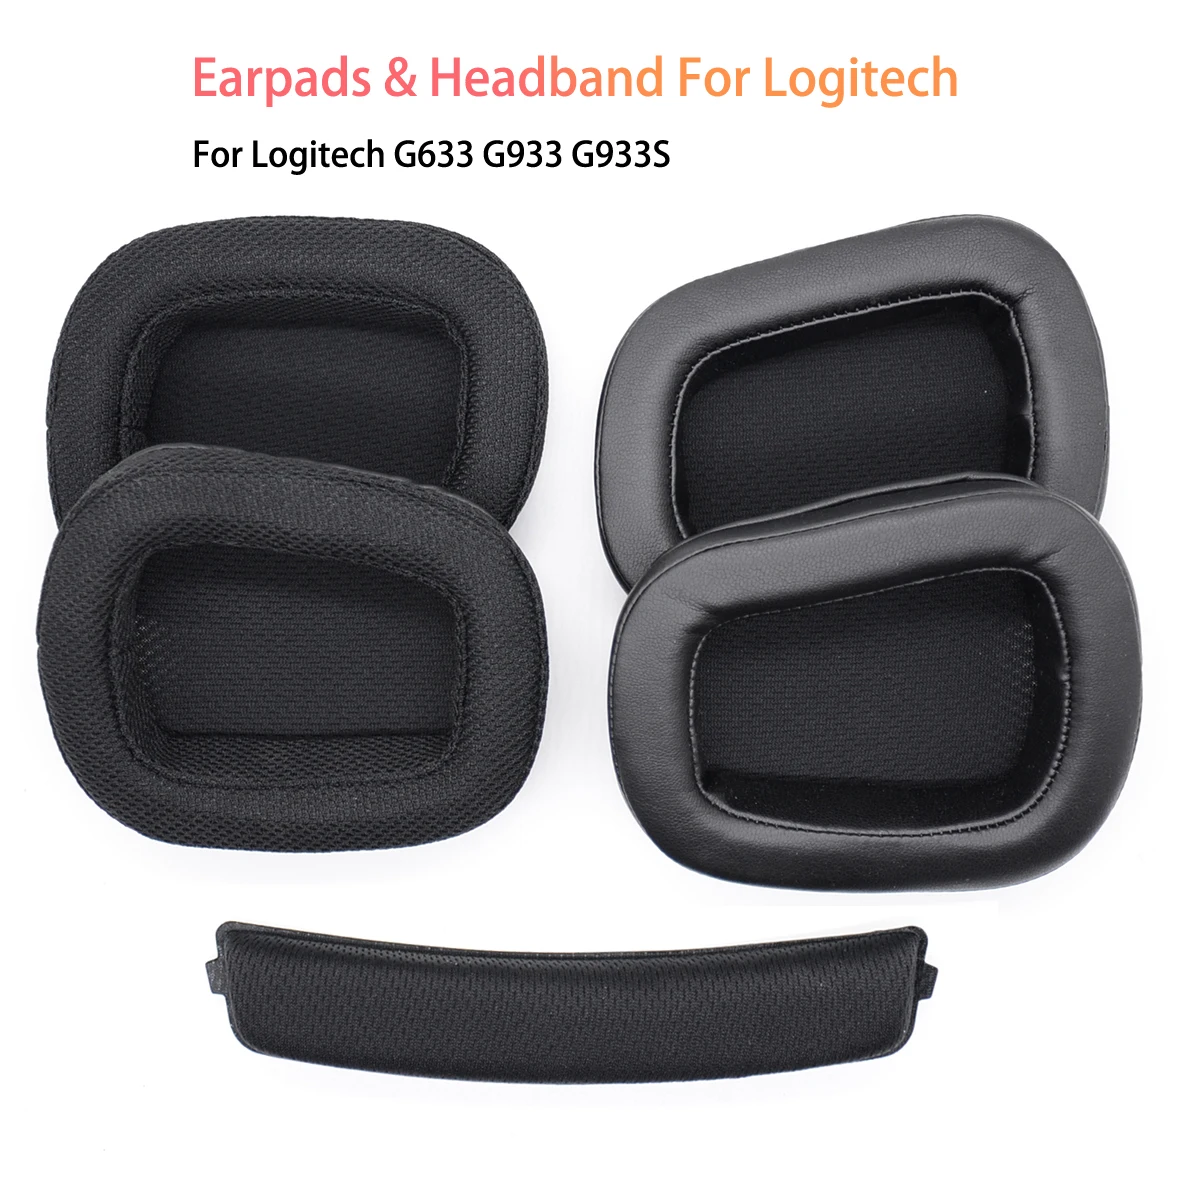 Replacement Ear Pads Cushions Earpads Earmuffs With Headband for Logitech G633 G933 G635 G935 G633S G933S Gaming Headset